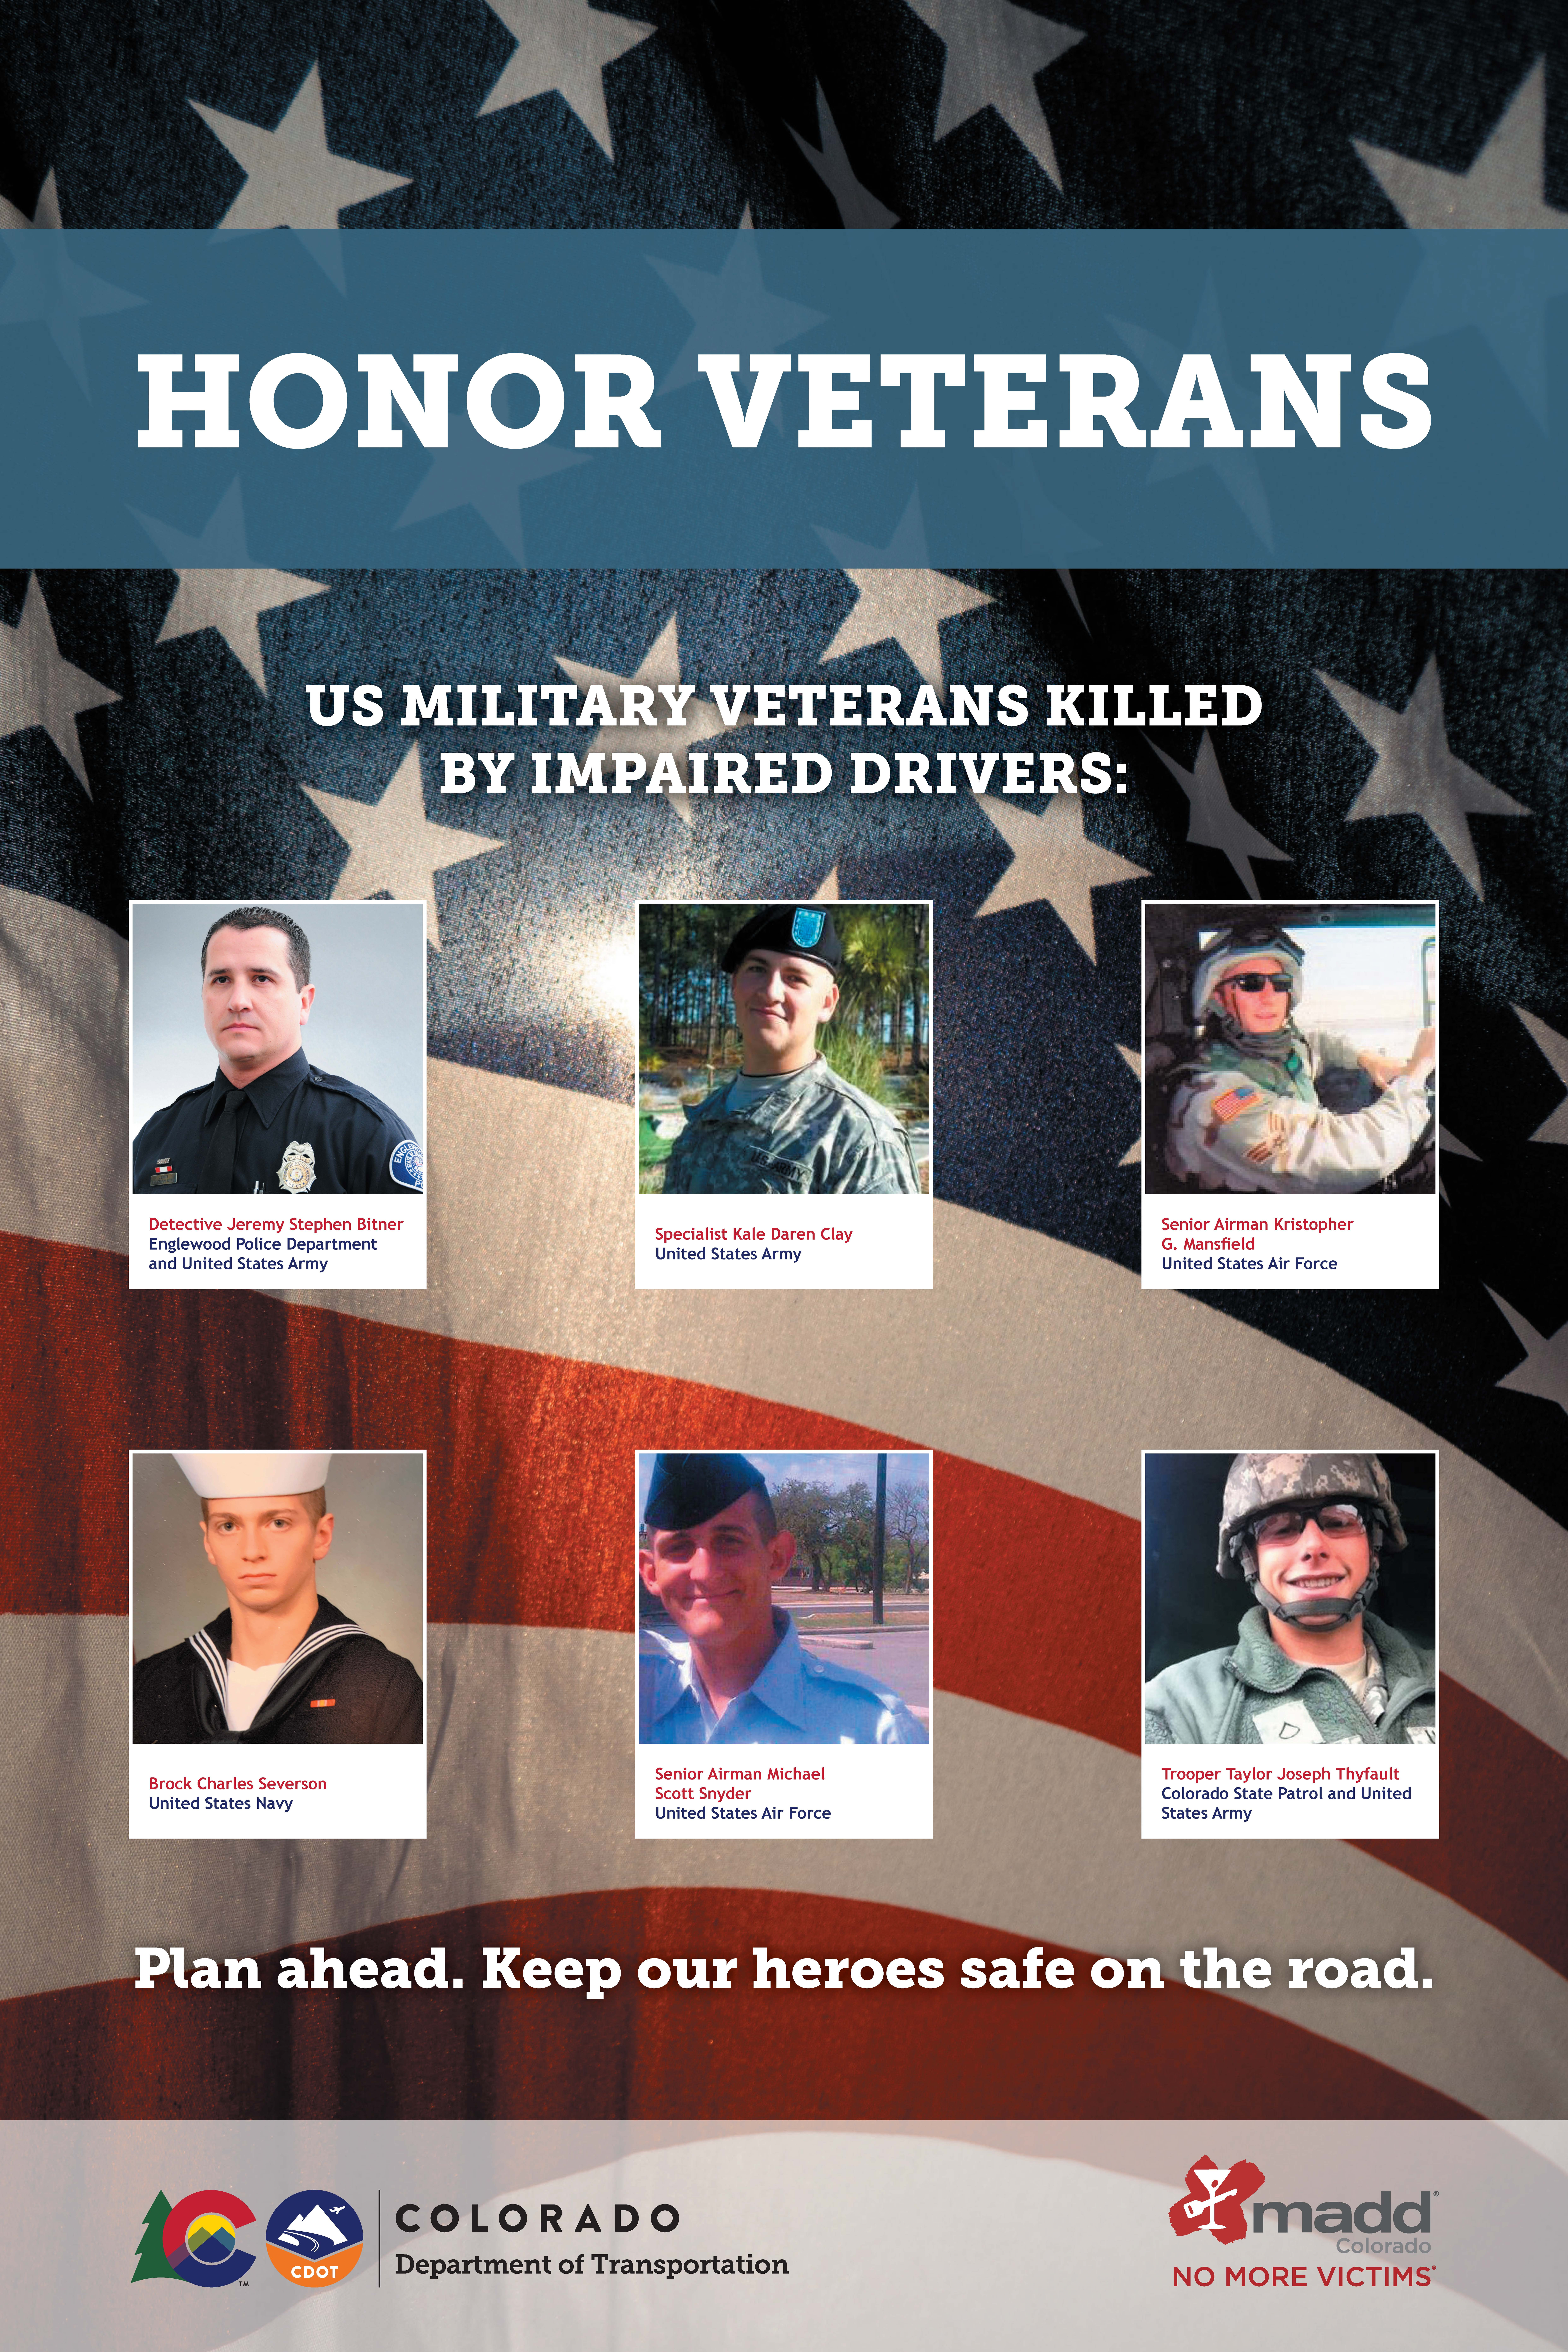 Honor Veterans - U.S. Military Veterans Killed by Impaired Drivers detail image